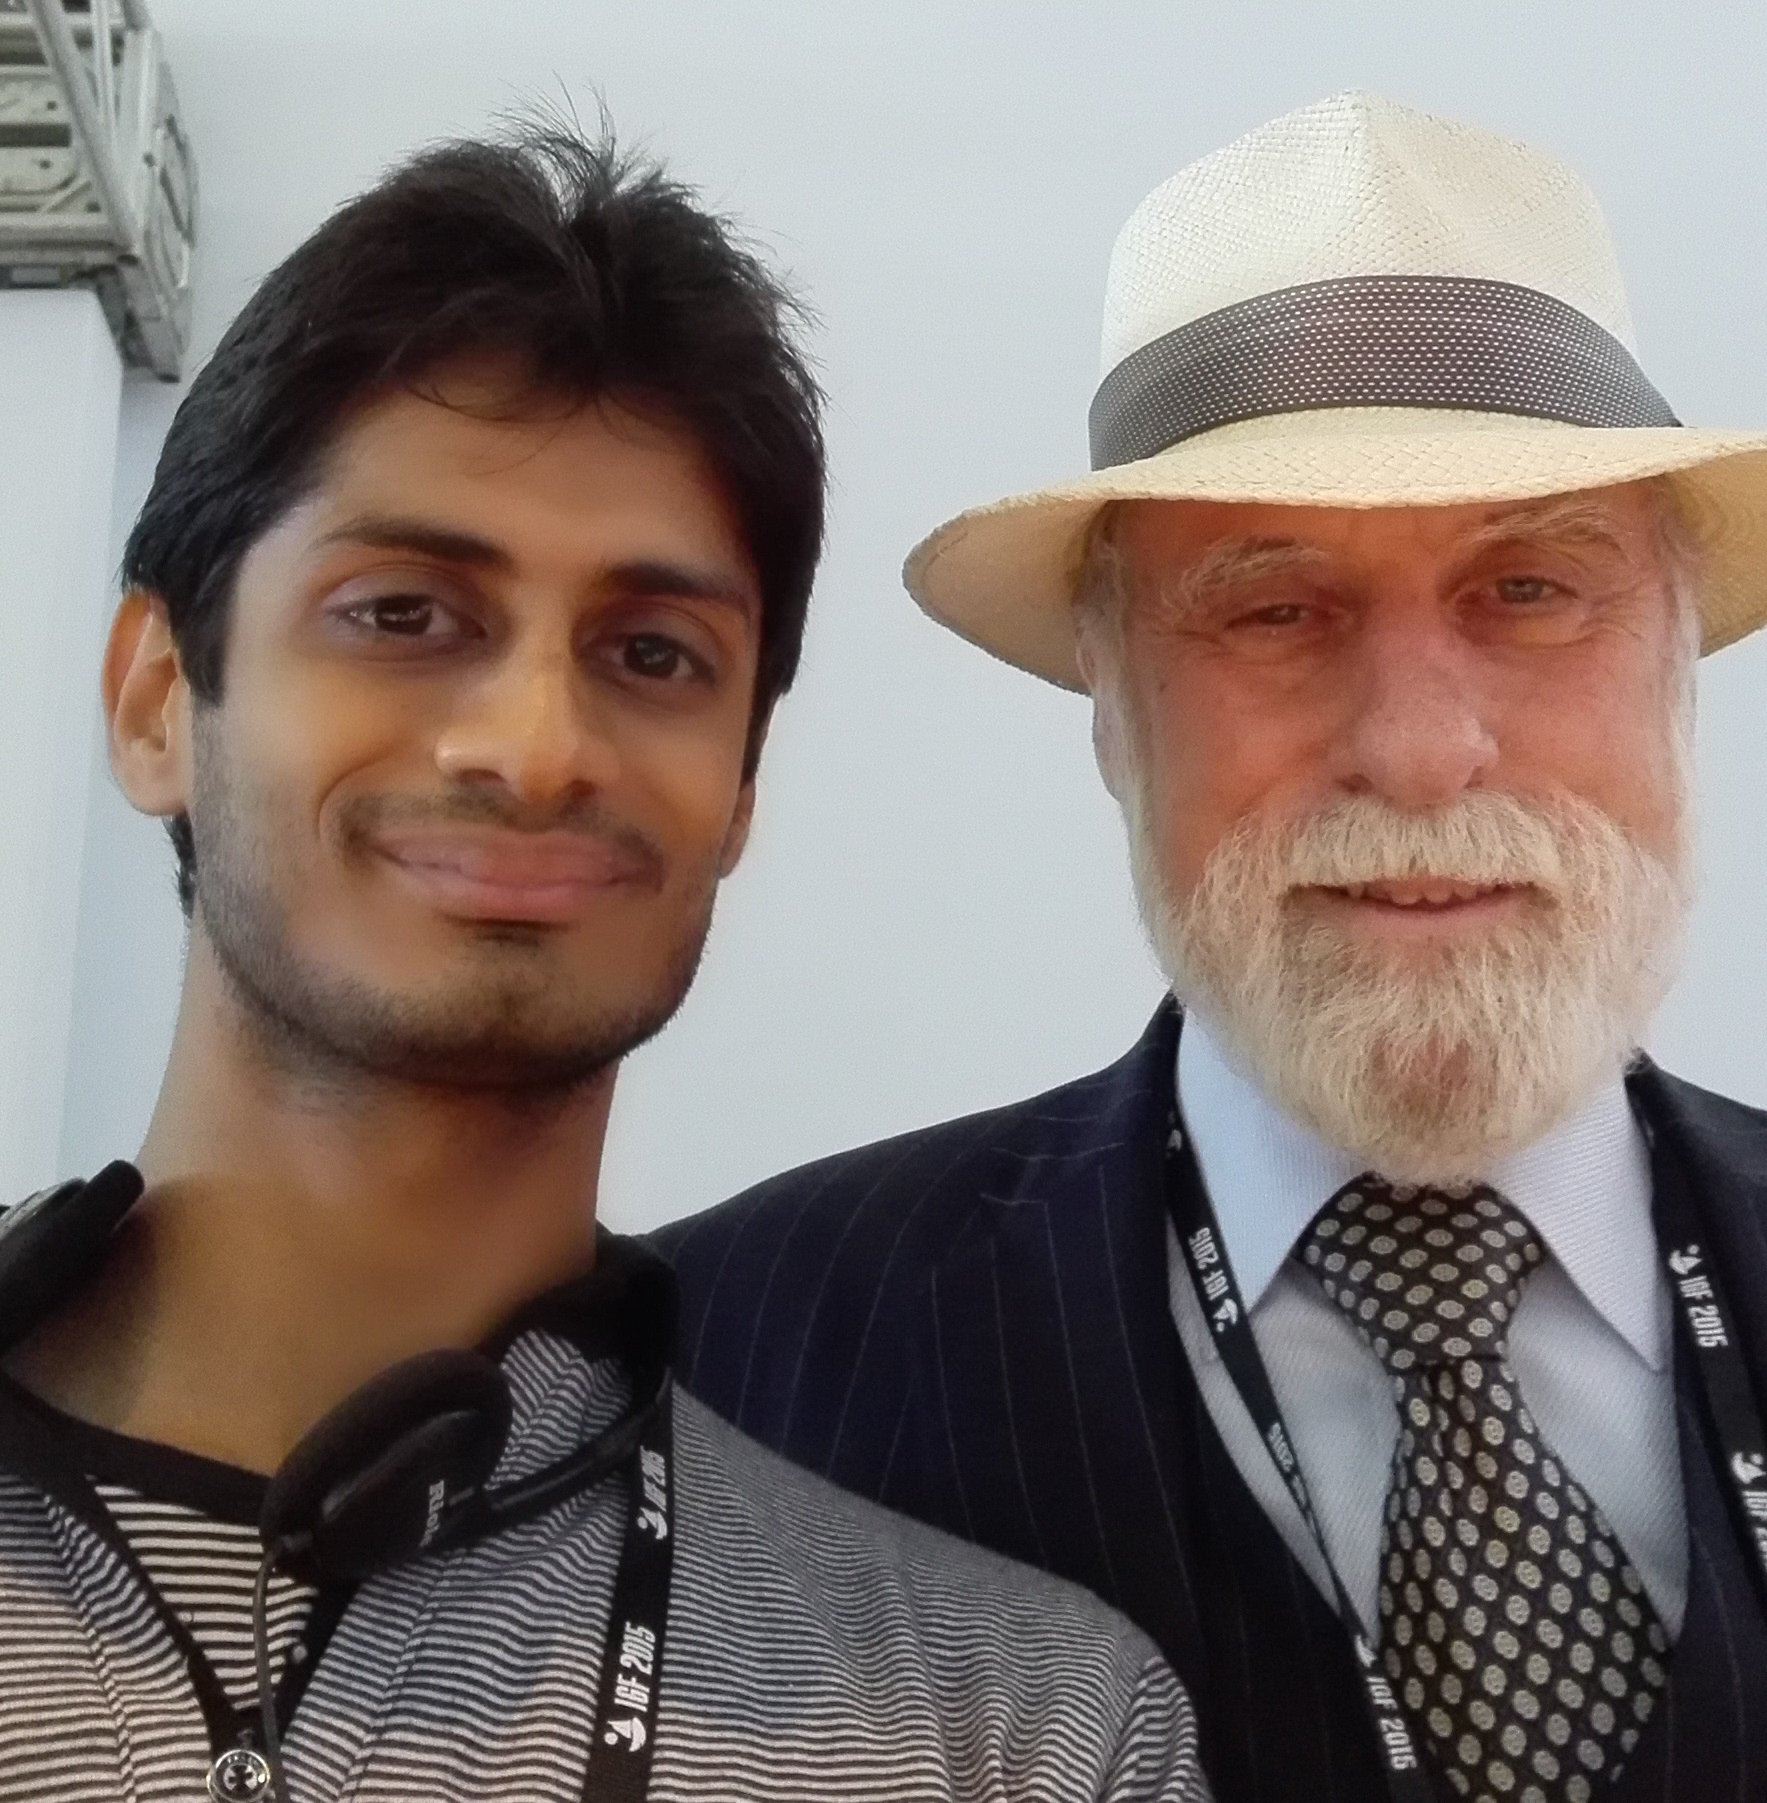 Adeel Sadiq (left), a Network Engineer for Huawei Technologies in Pakistan, with Vint Cerf at IGF